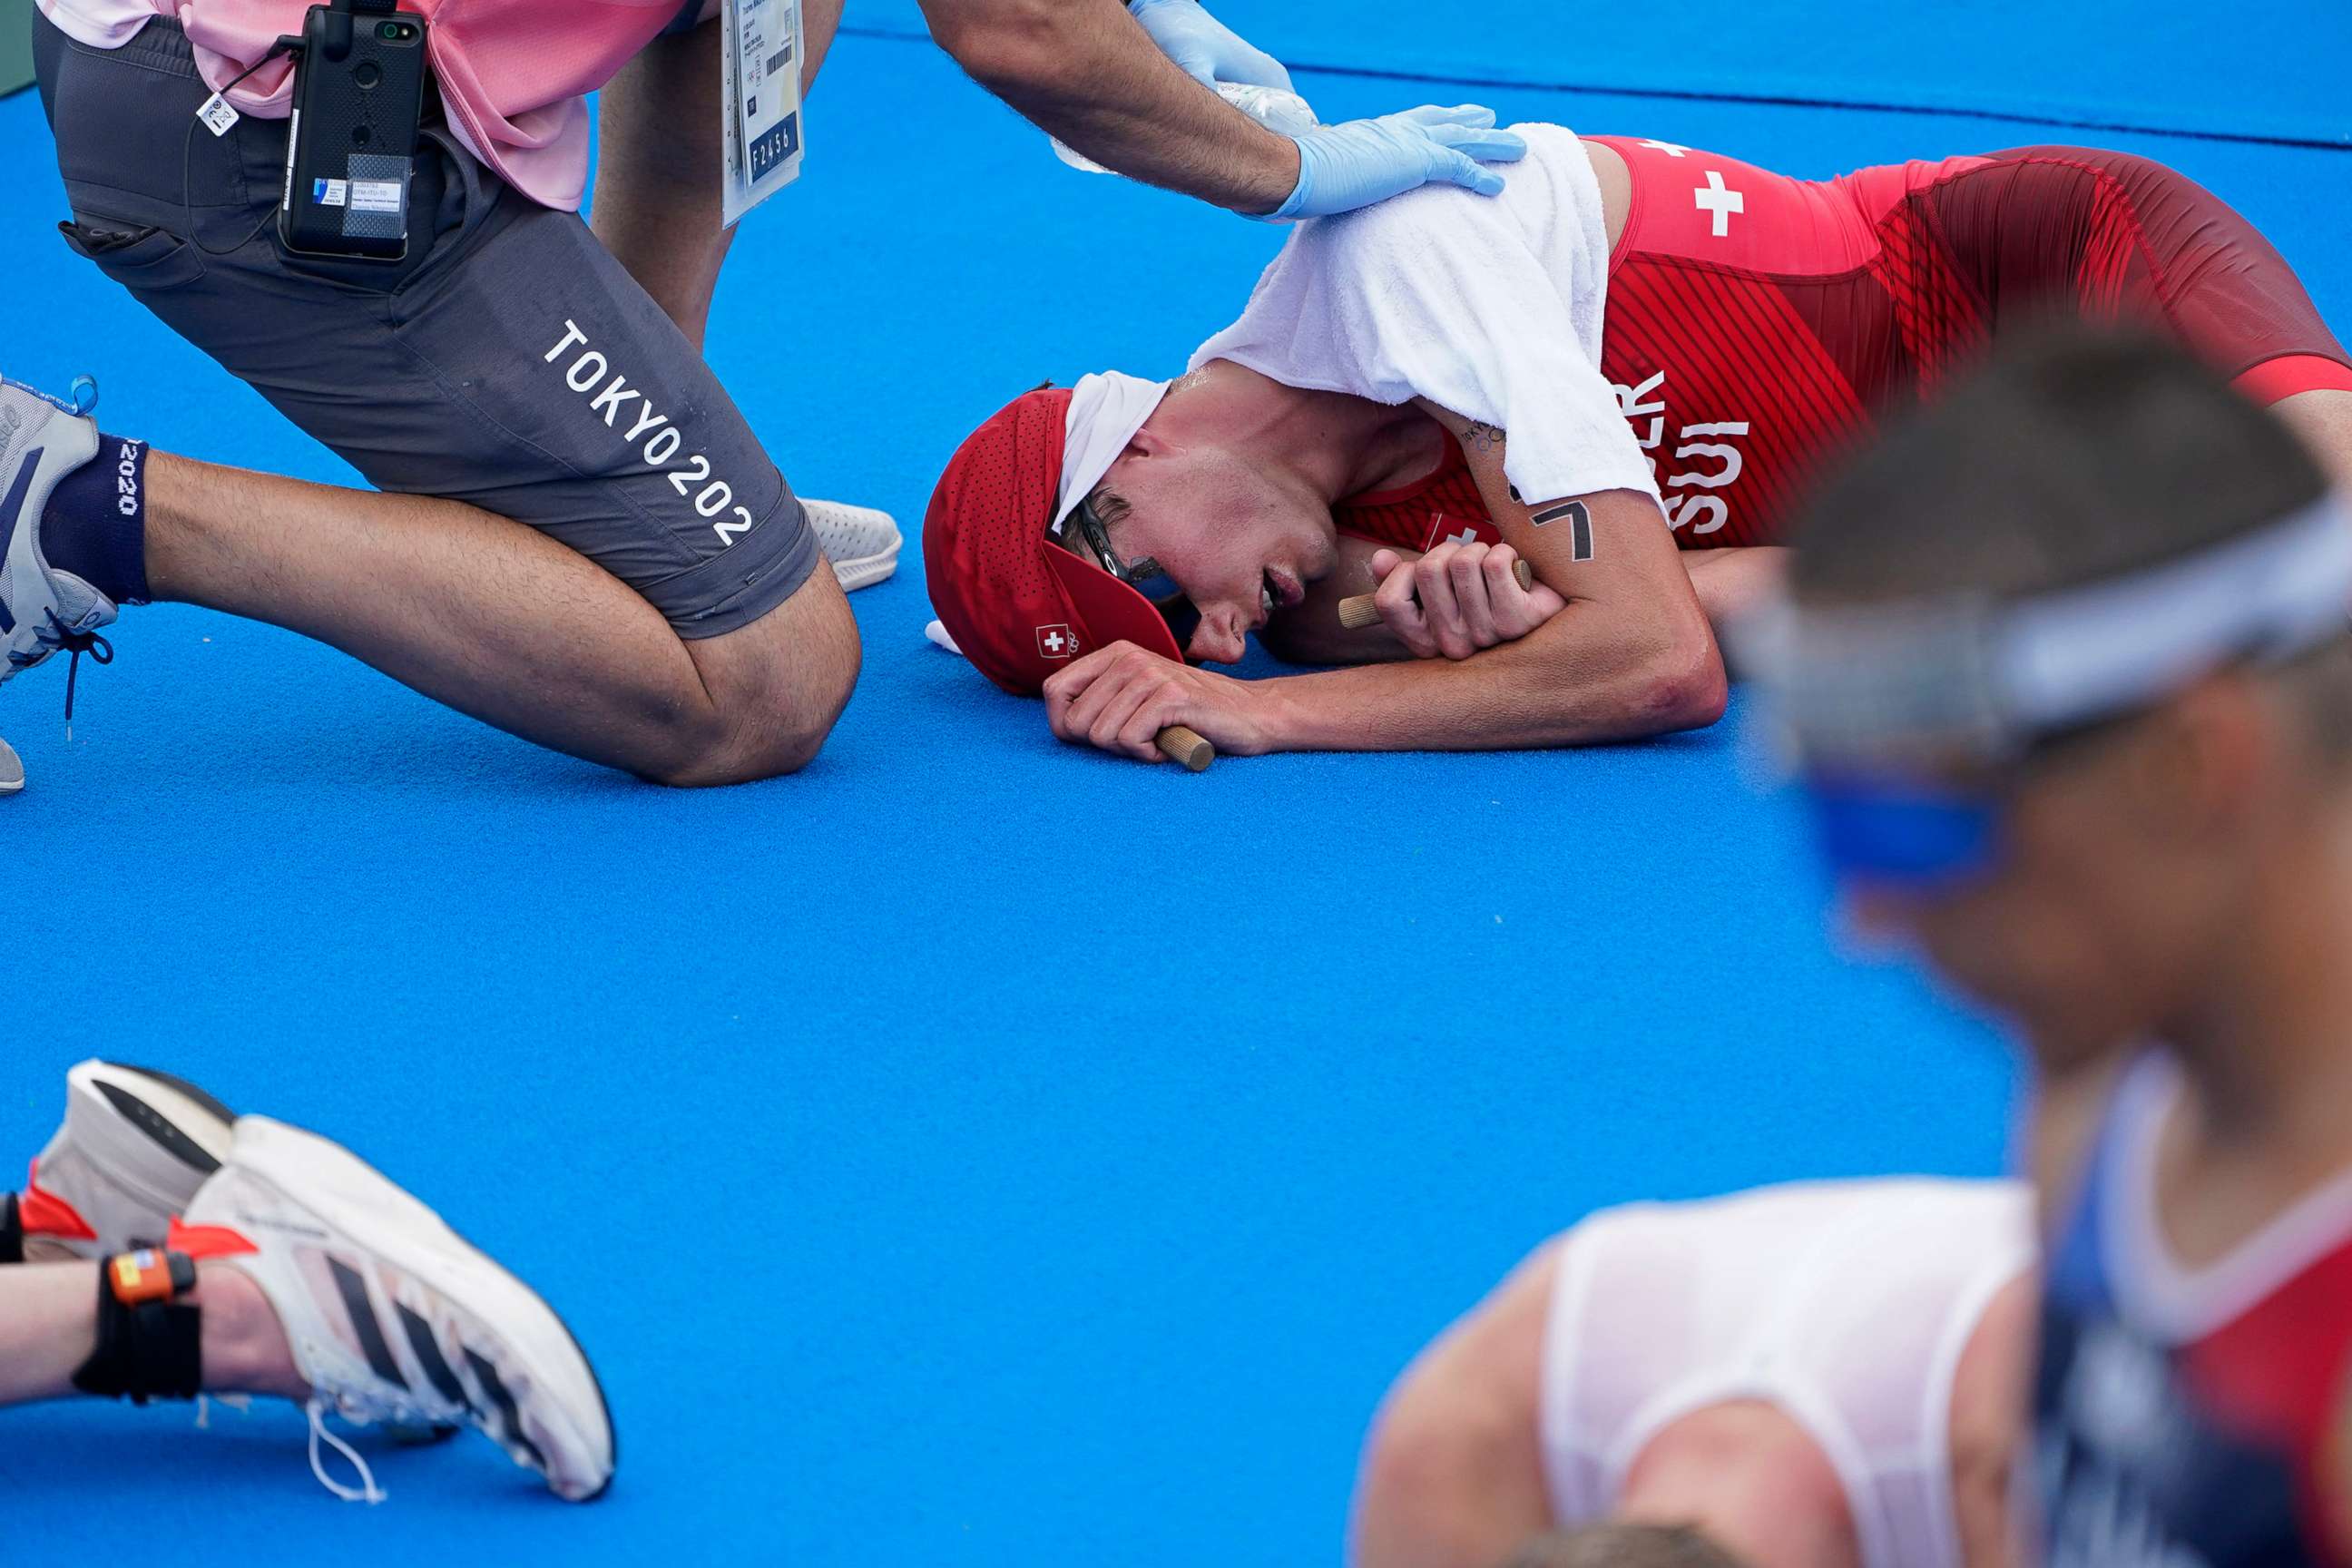 PHOTO: Max Studer, of Switzerland, is tended to after collapsing along with several other athletes, after finishing the men's individual triathlon at the 2020 Summer Olympics, July 26, 2021, in Tokyo.